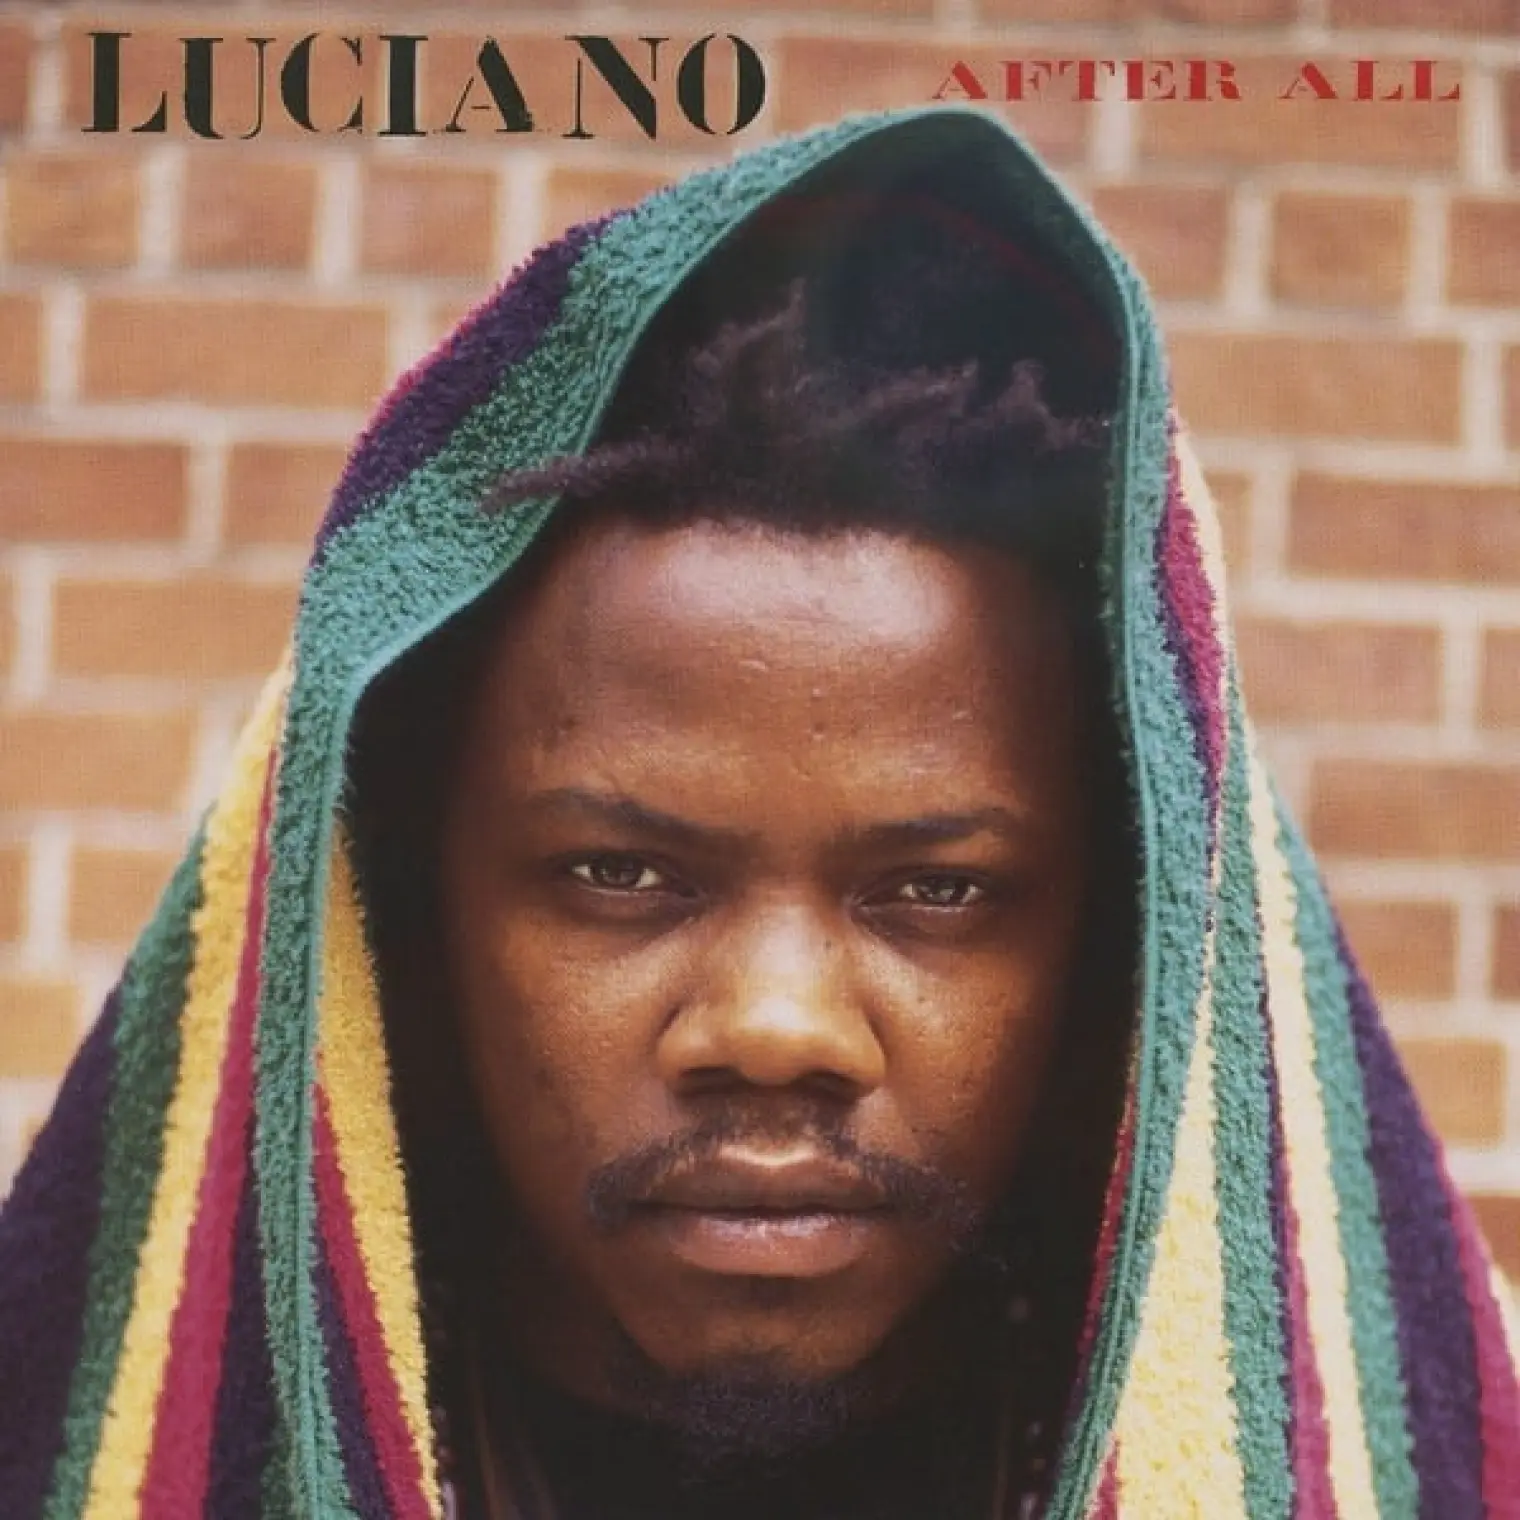 After All -  Luciano 